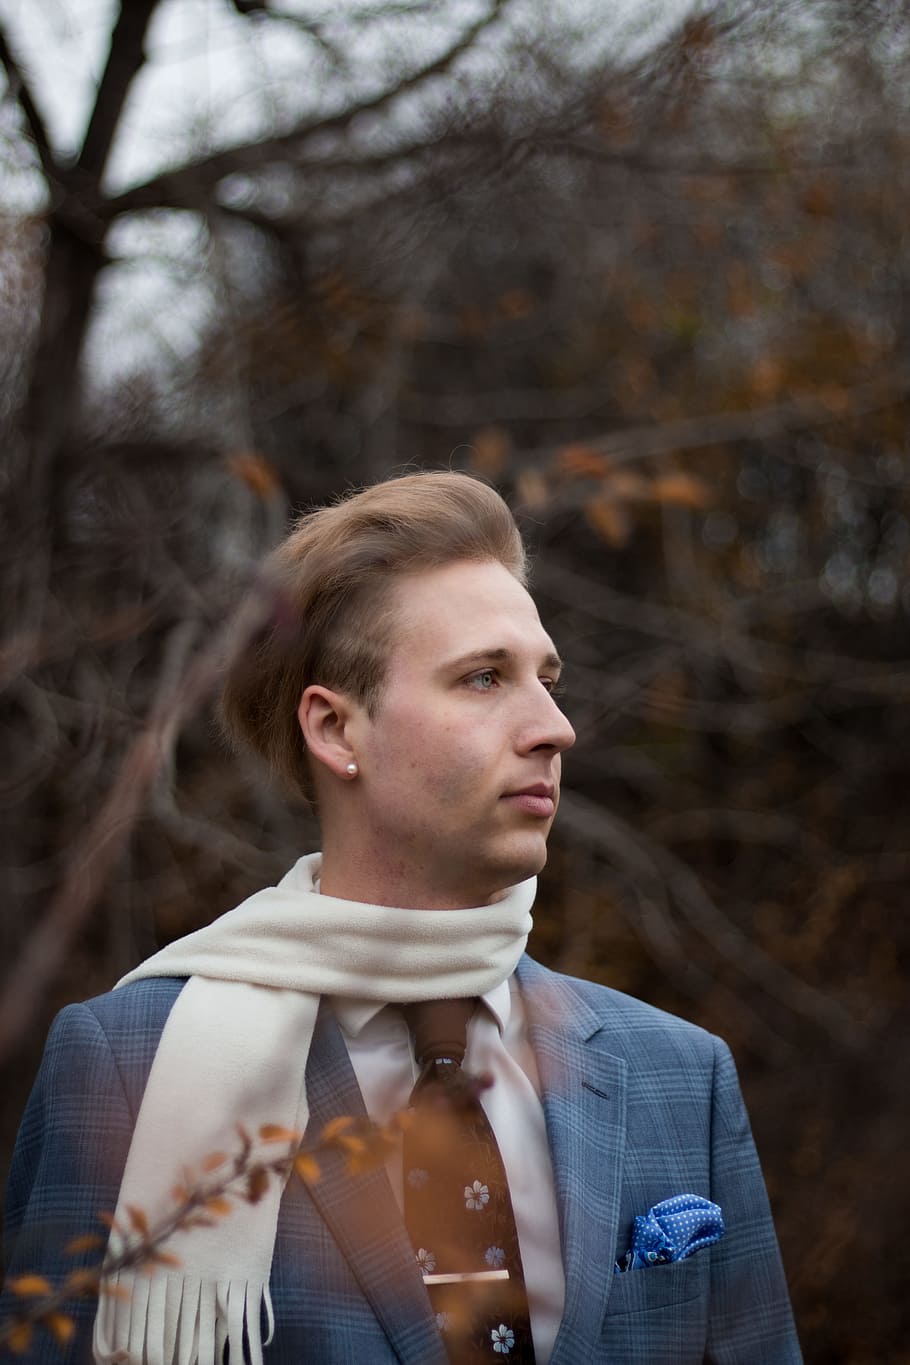 people, man, fashion, formal, scarf, nature, leaves, green, young adult, looking away